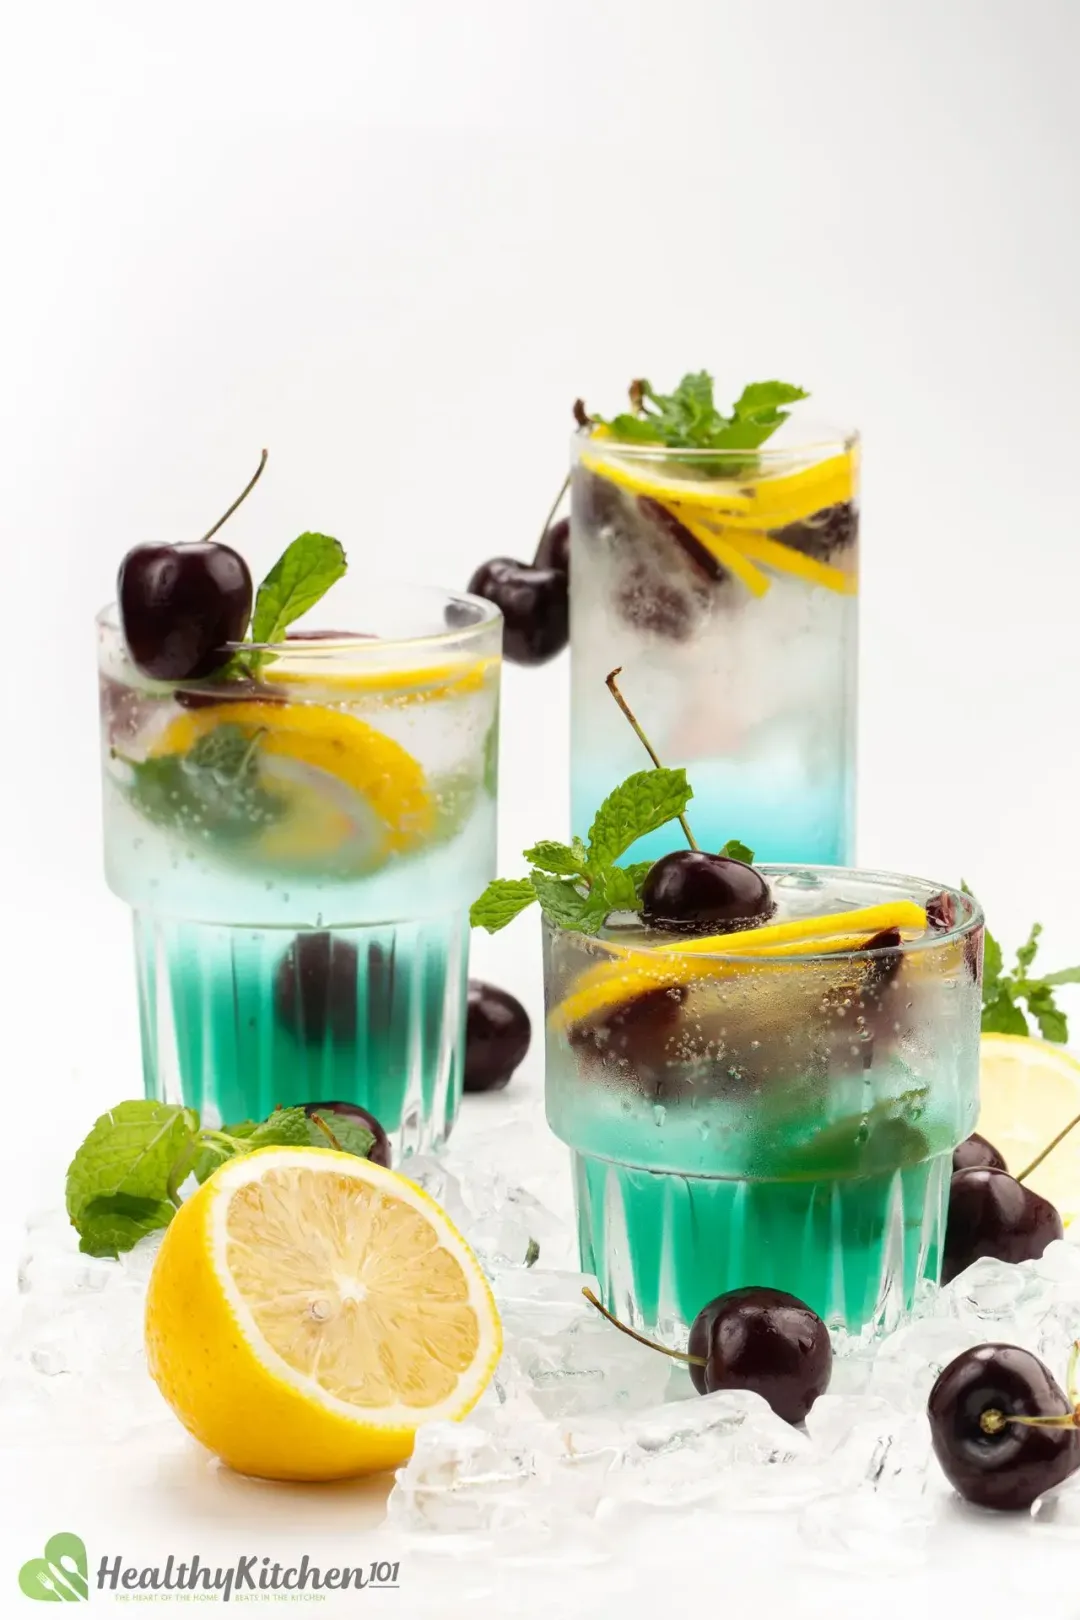 Three cocktail glasses of a cyan-hued drink filled with cherries, lemon wedges, and mints